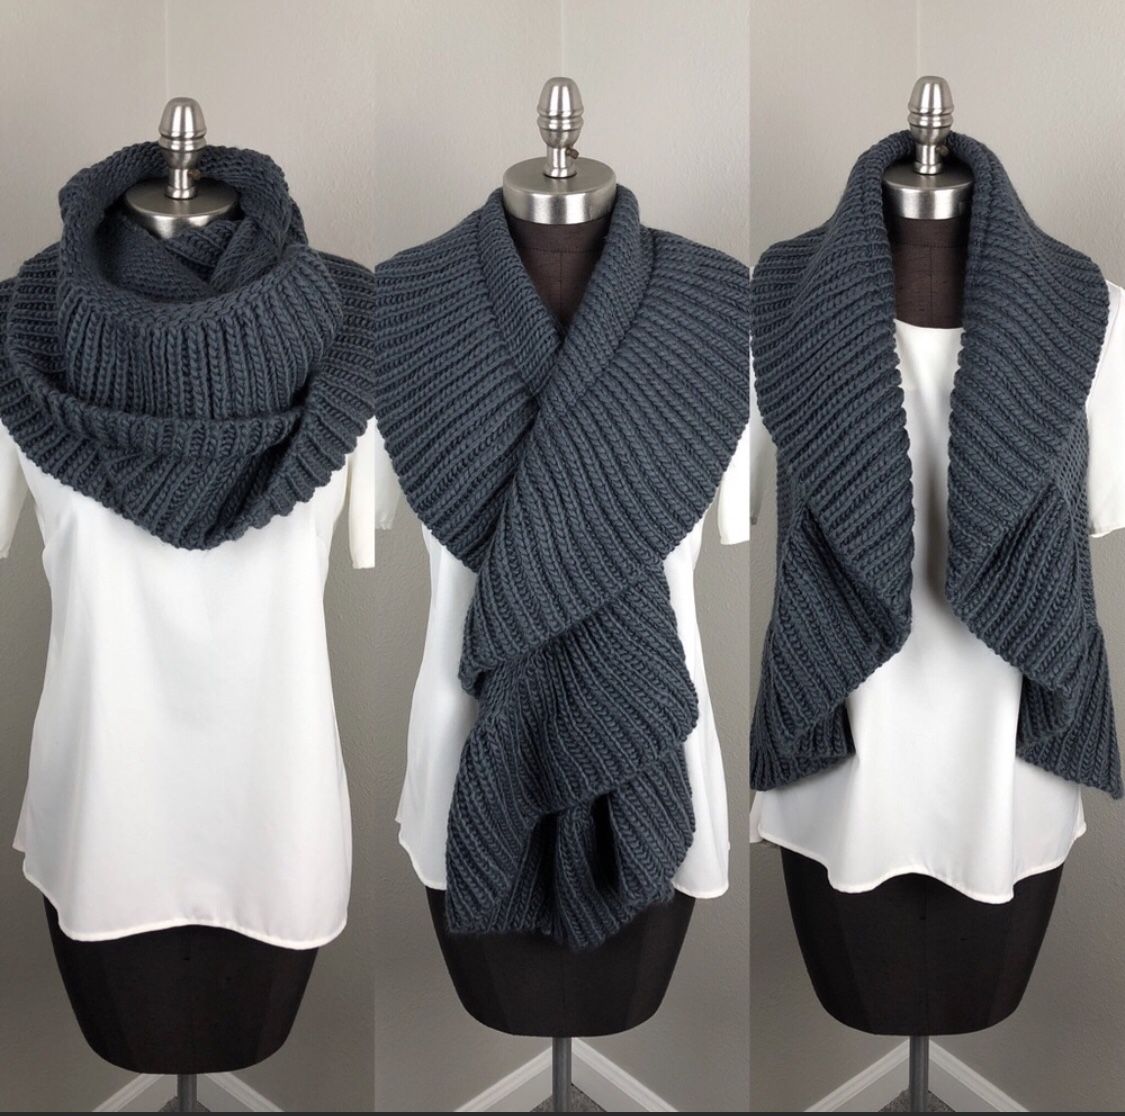 NWT Grey Chunky Knit Infinity Scarf Sweater Vest 360 Loop Scarf VT Luxe by Collection18